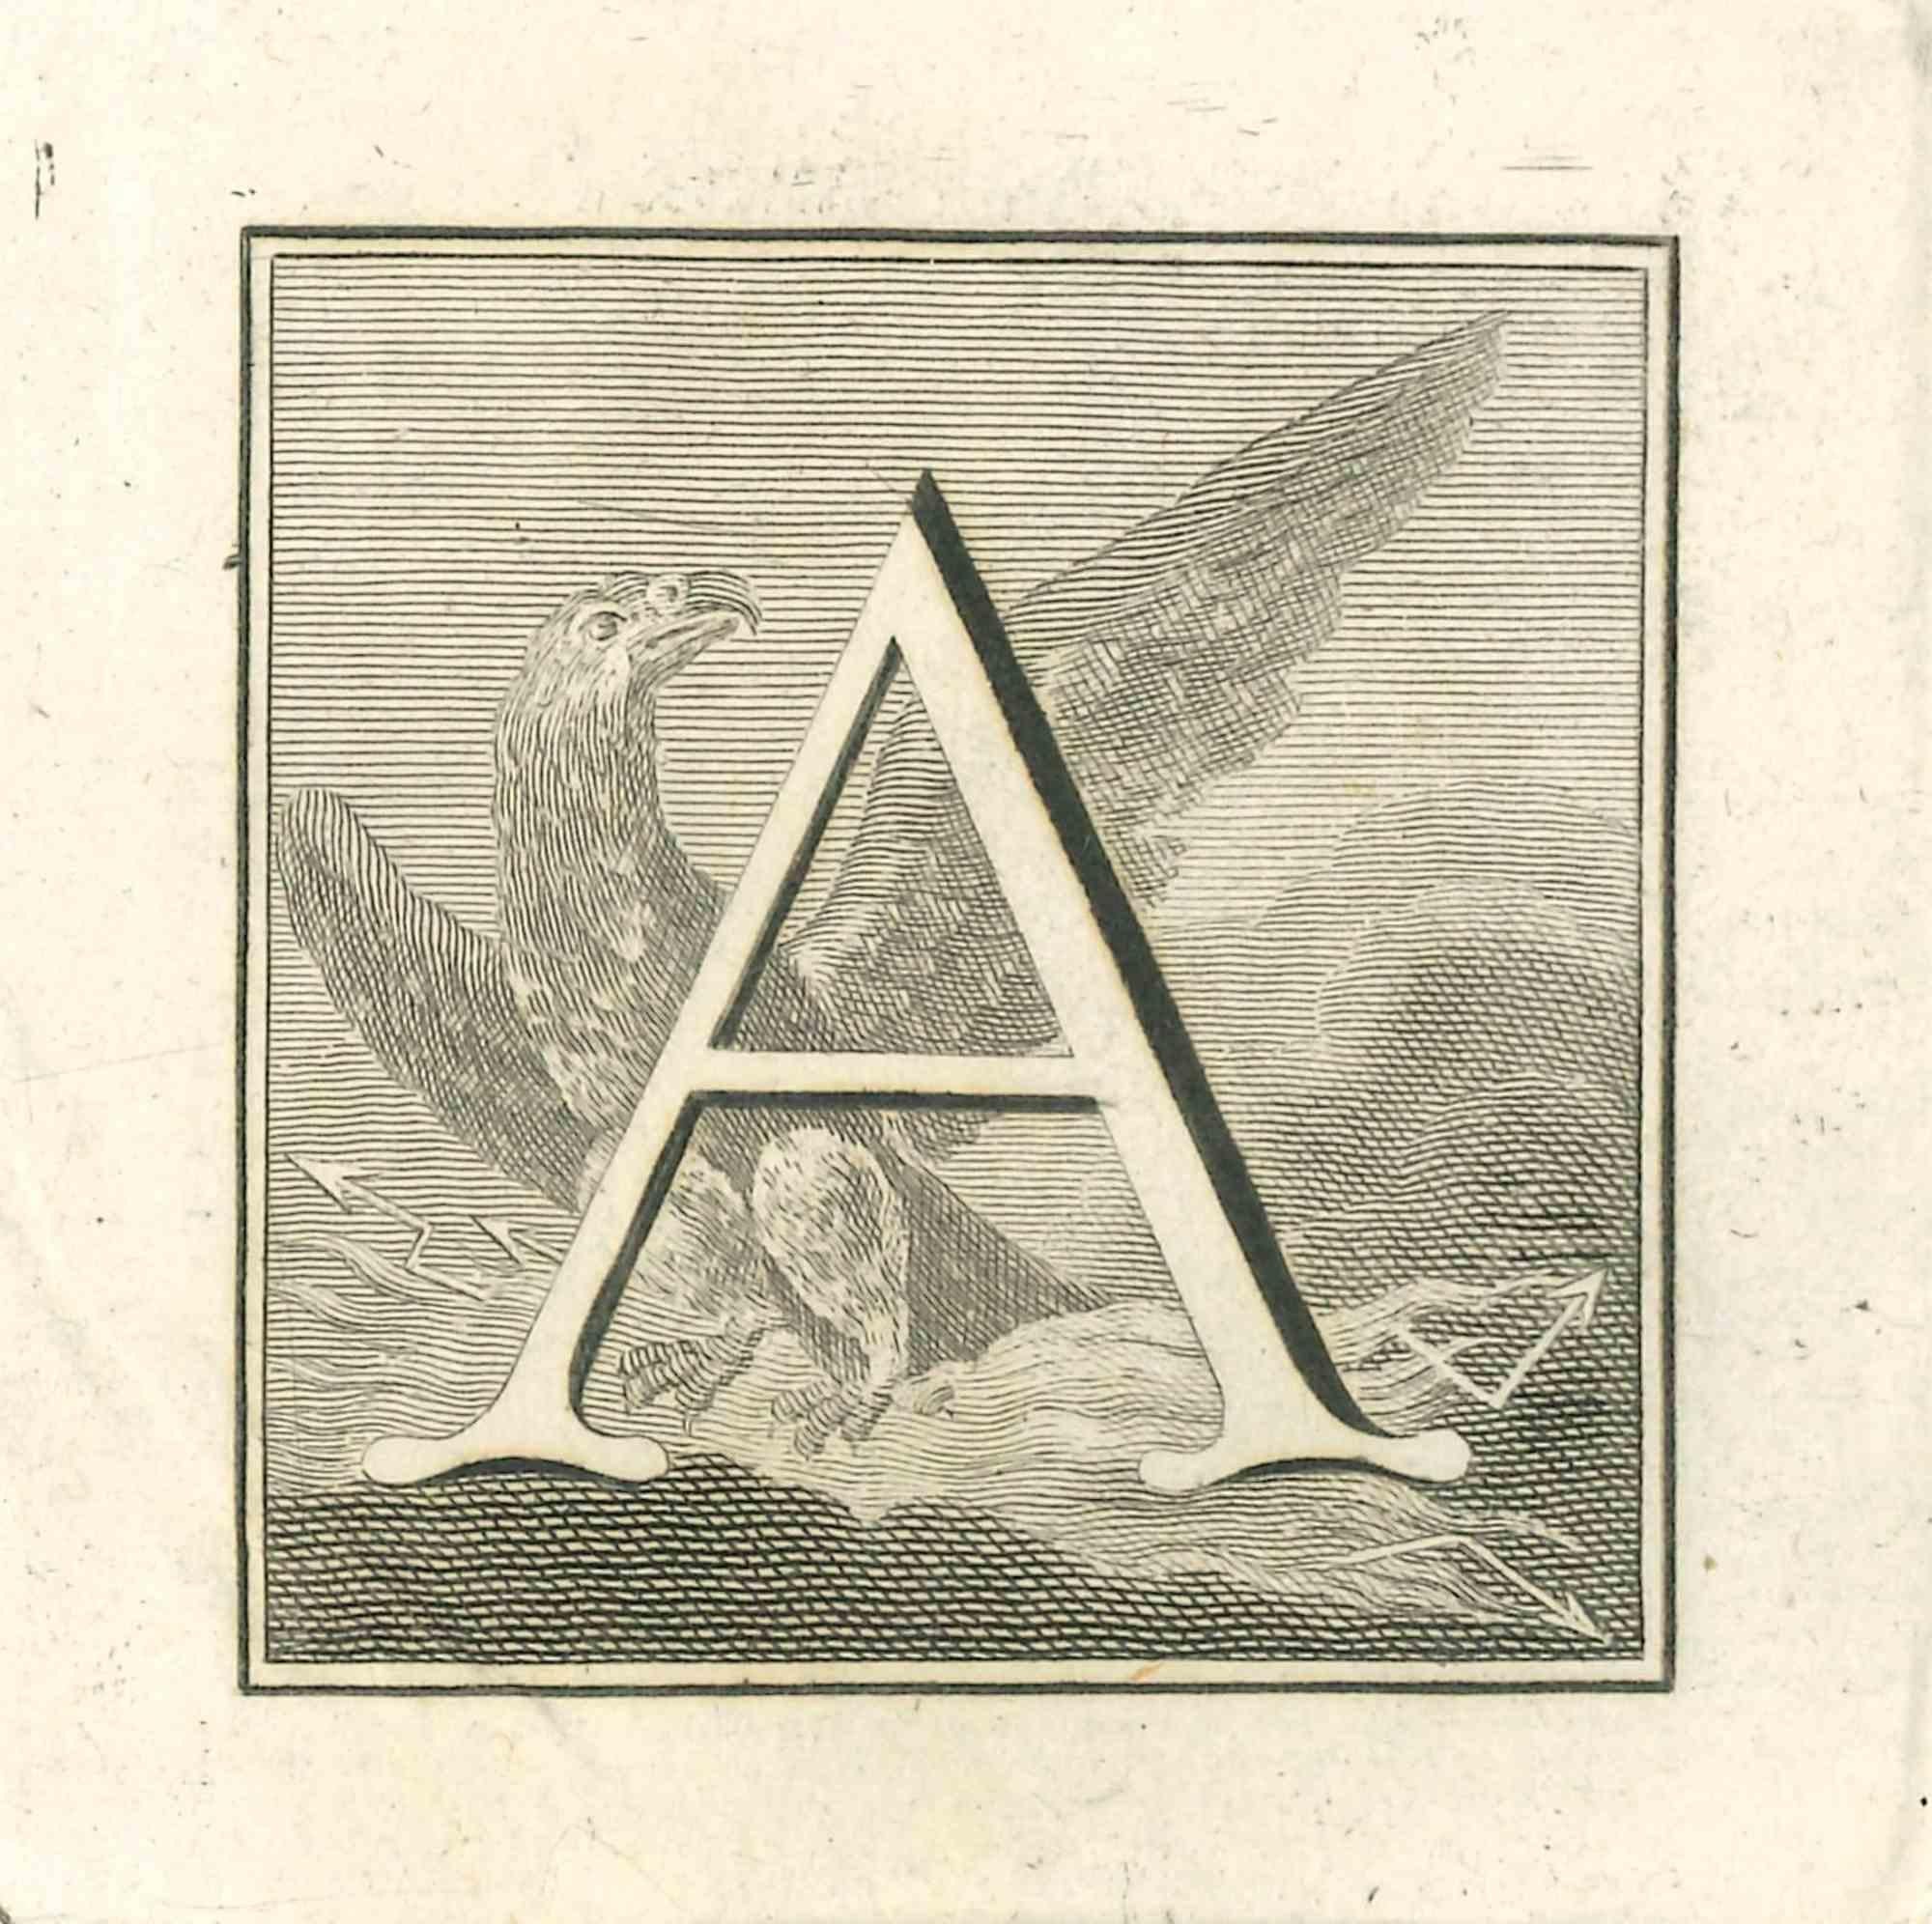 Letter A is an Etching realized by Luigi Vanvitelli artist of 18th century.

The etching belongs to the print suite “Antiquities of Herculaneum Exposed” (original title: “Le Antichità di Ercolano Esposte”), an eight-volume volume of engravings of